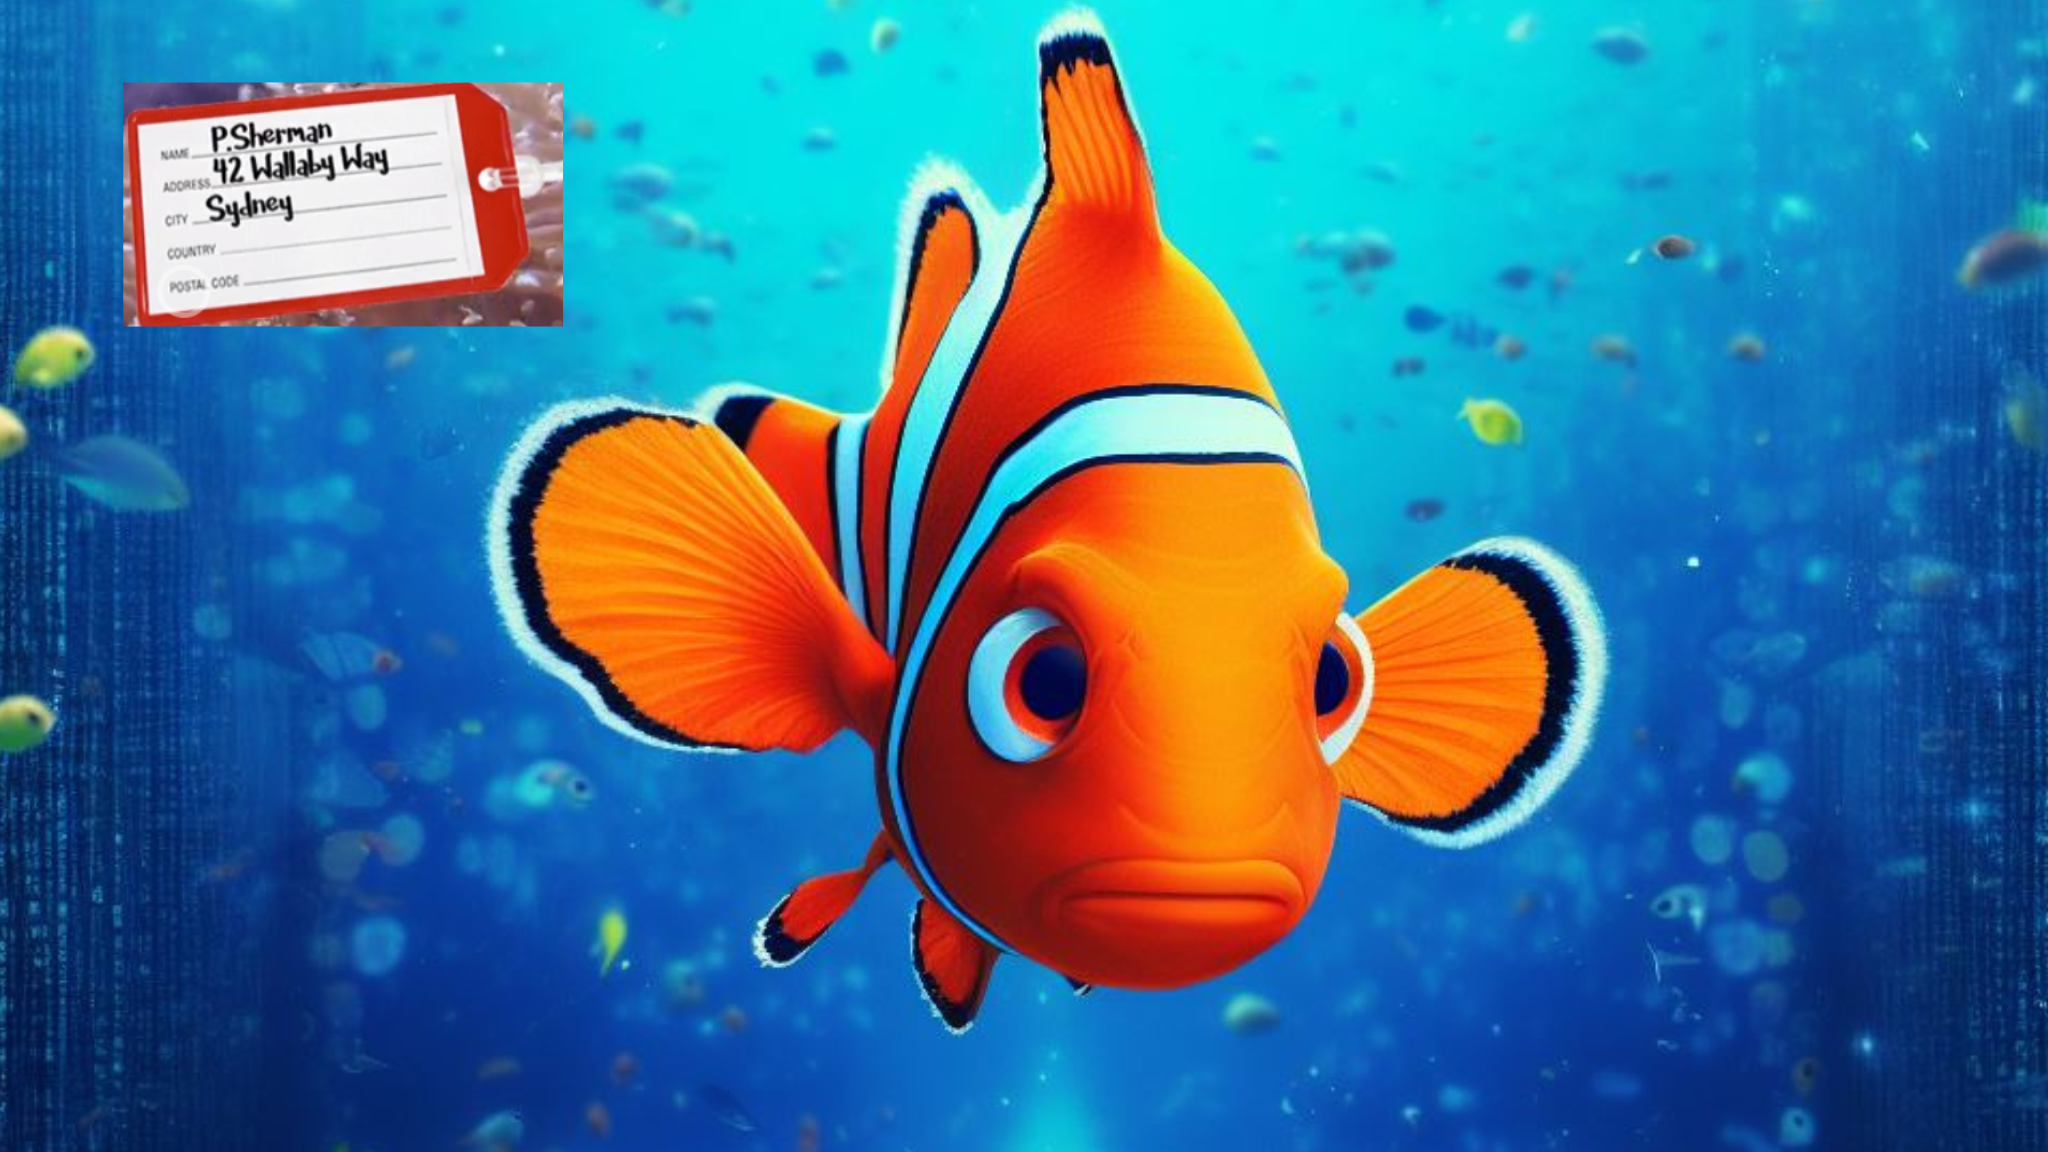 In Finding Nemo, Dory And Marlin Are On A Mission To 42 Wallaby Way To, Well, Find Nemo.